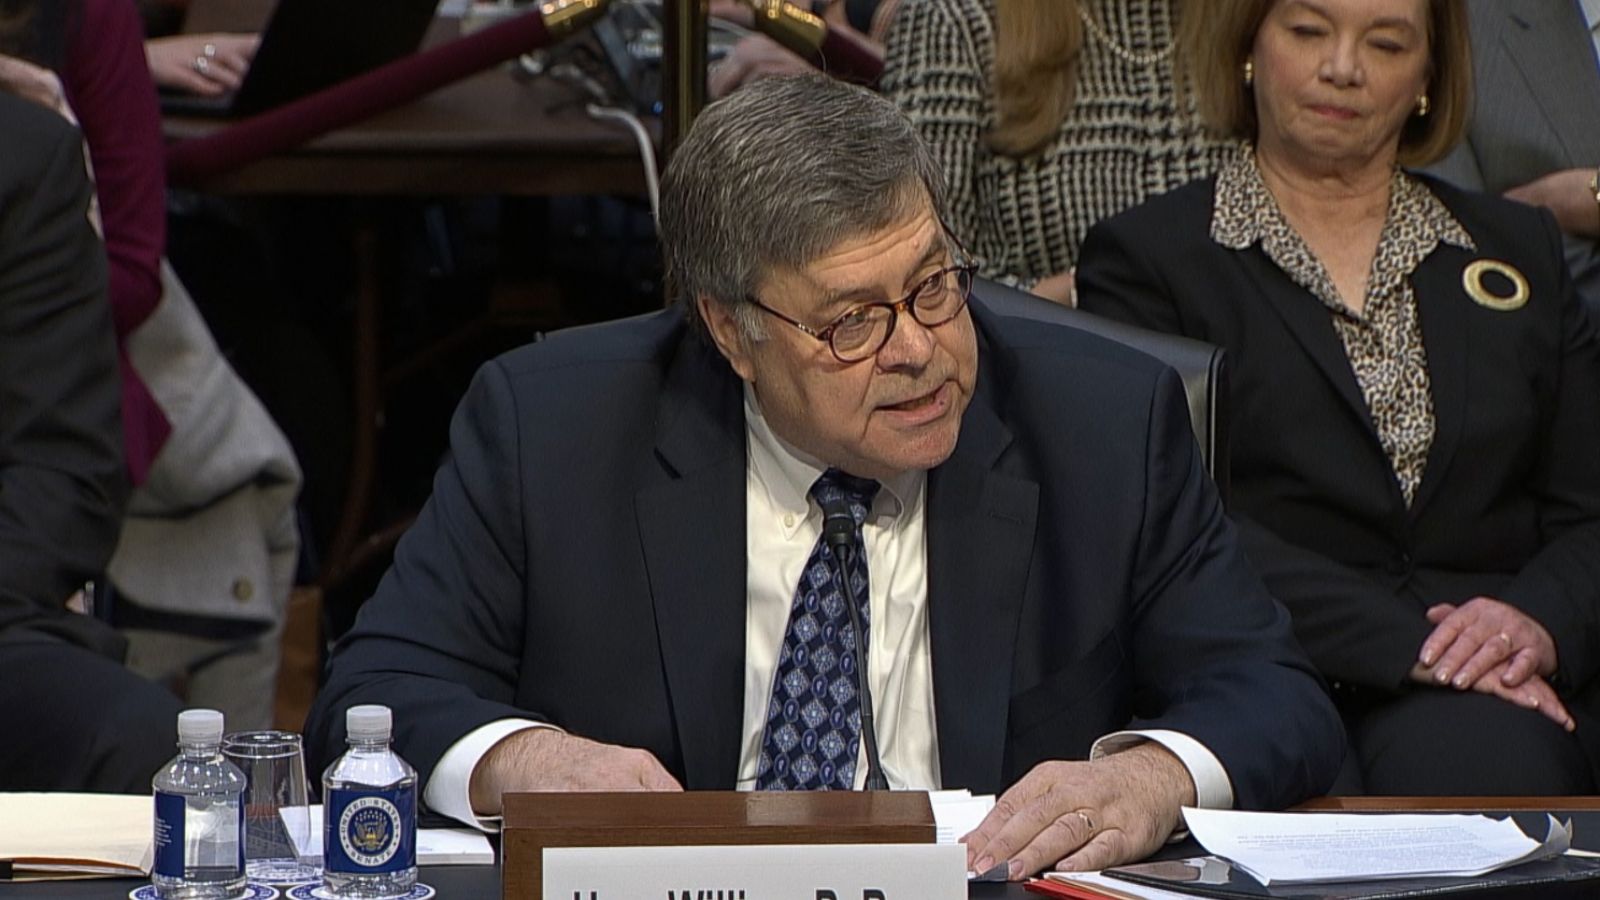 Old Friends William Barr And Robert Mueller May Work Together